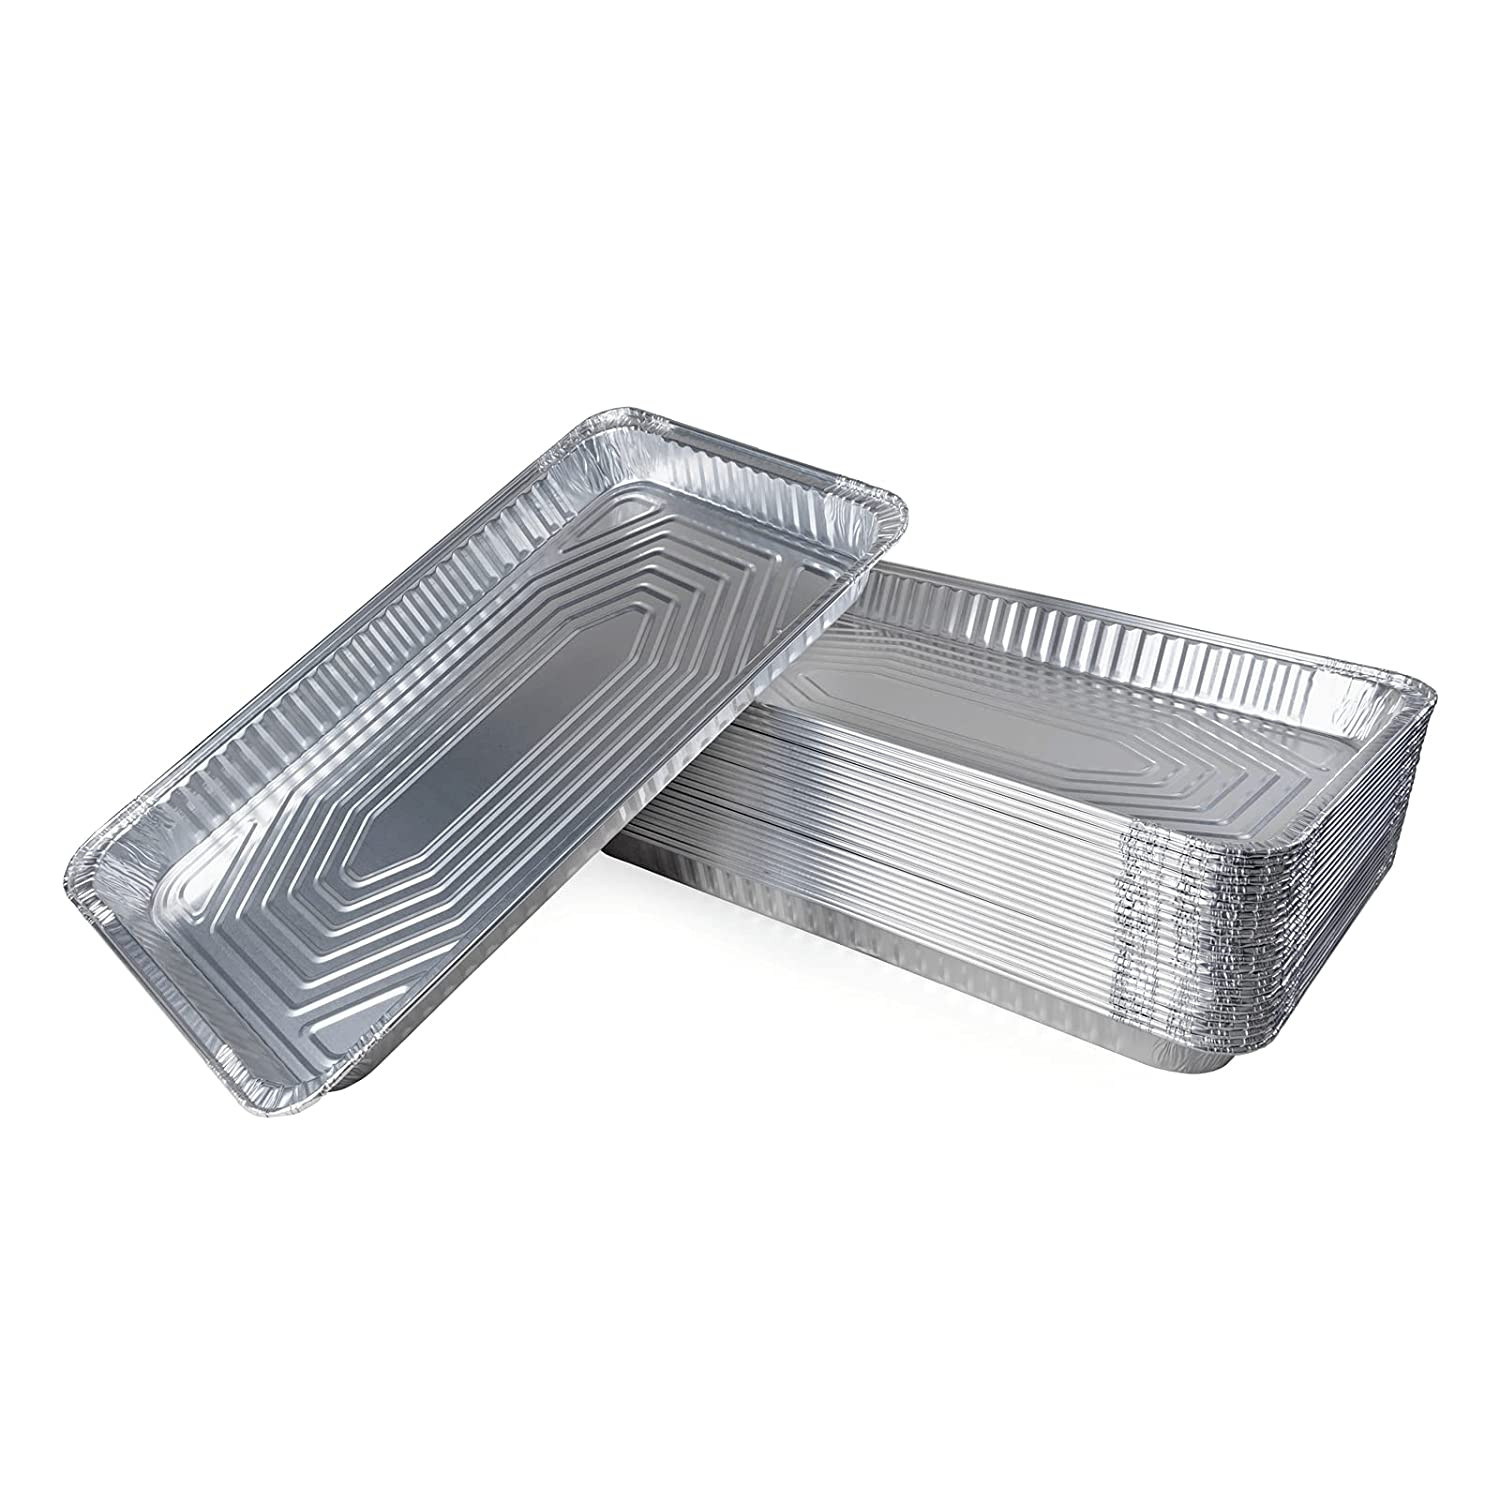 Heavy Duty Full Size Shallow Aluminum Pans with Lids Foil Roasting & Steam  Table Pan 21x13 inch - Shallow Chafing Trays for Catering Disposable Large